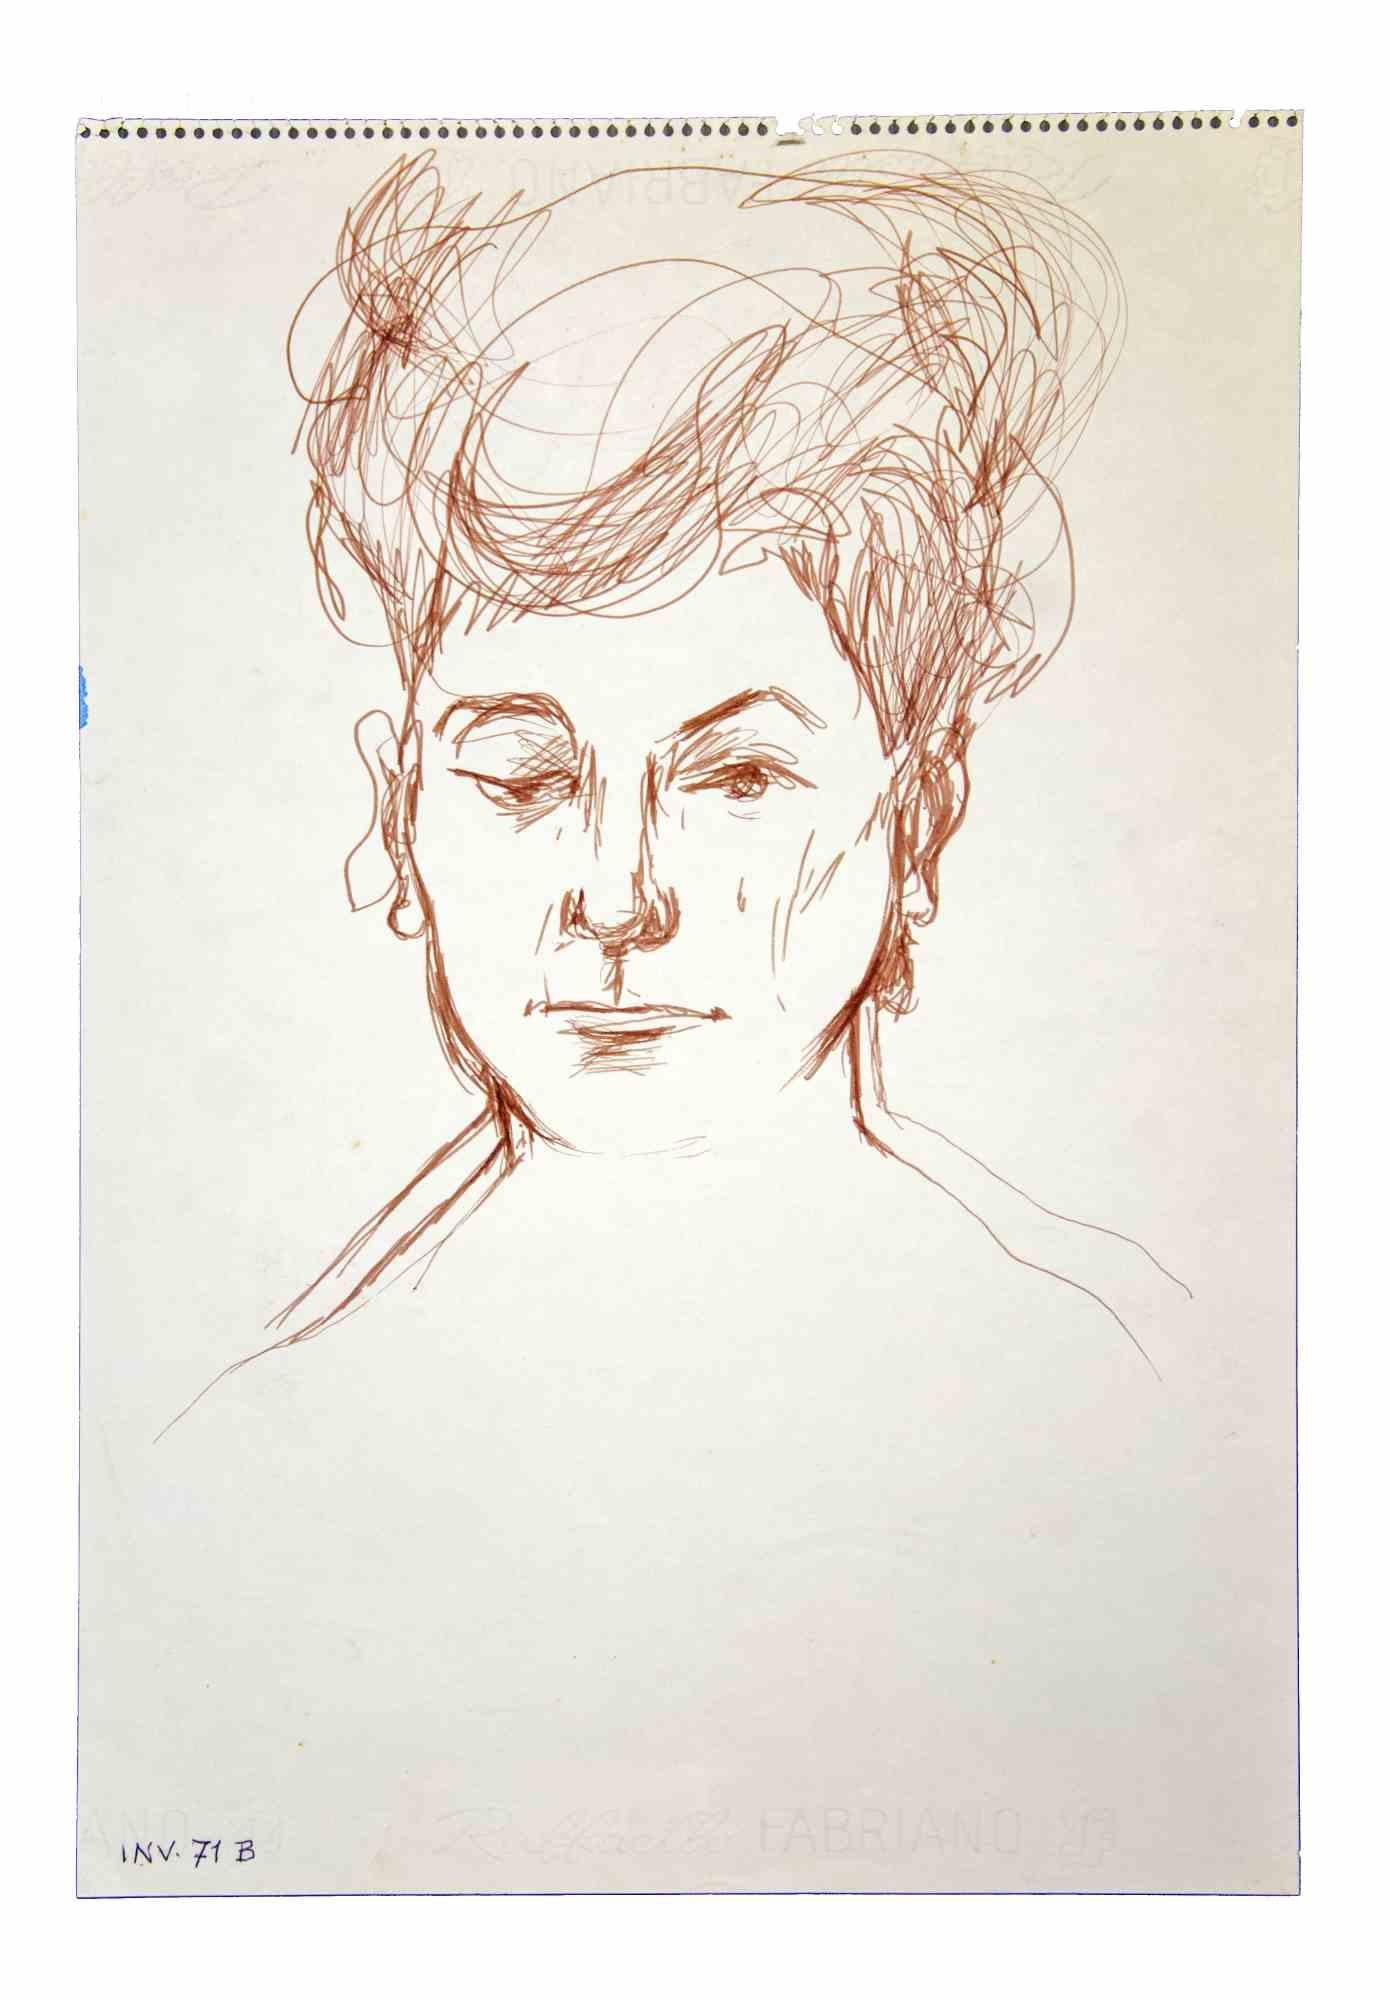 Portrait is an original artwork realized in the 1970s by the Italian Contemporary artist  Leo Guida  (1992 - 2017).

Original drawings in China ink on paper.

Good conditions but aged.

The artwork is depicted through strong strokes in well-balanced